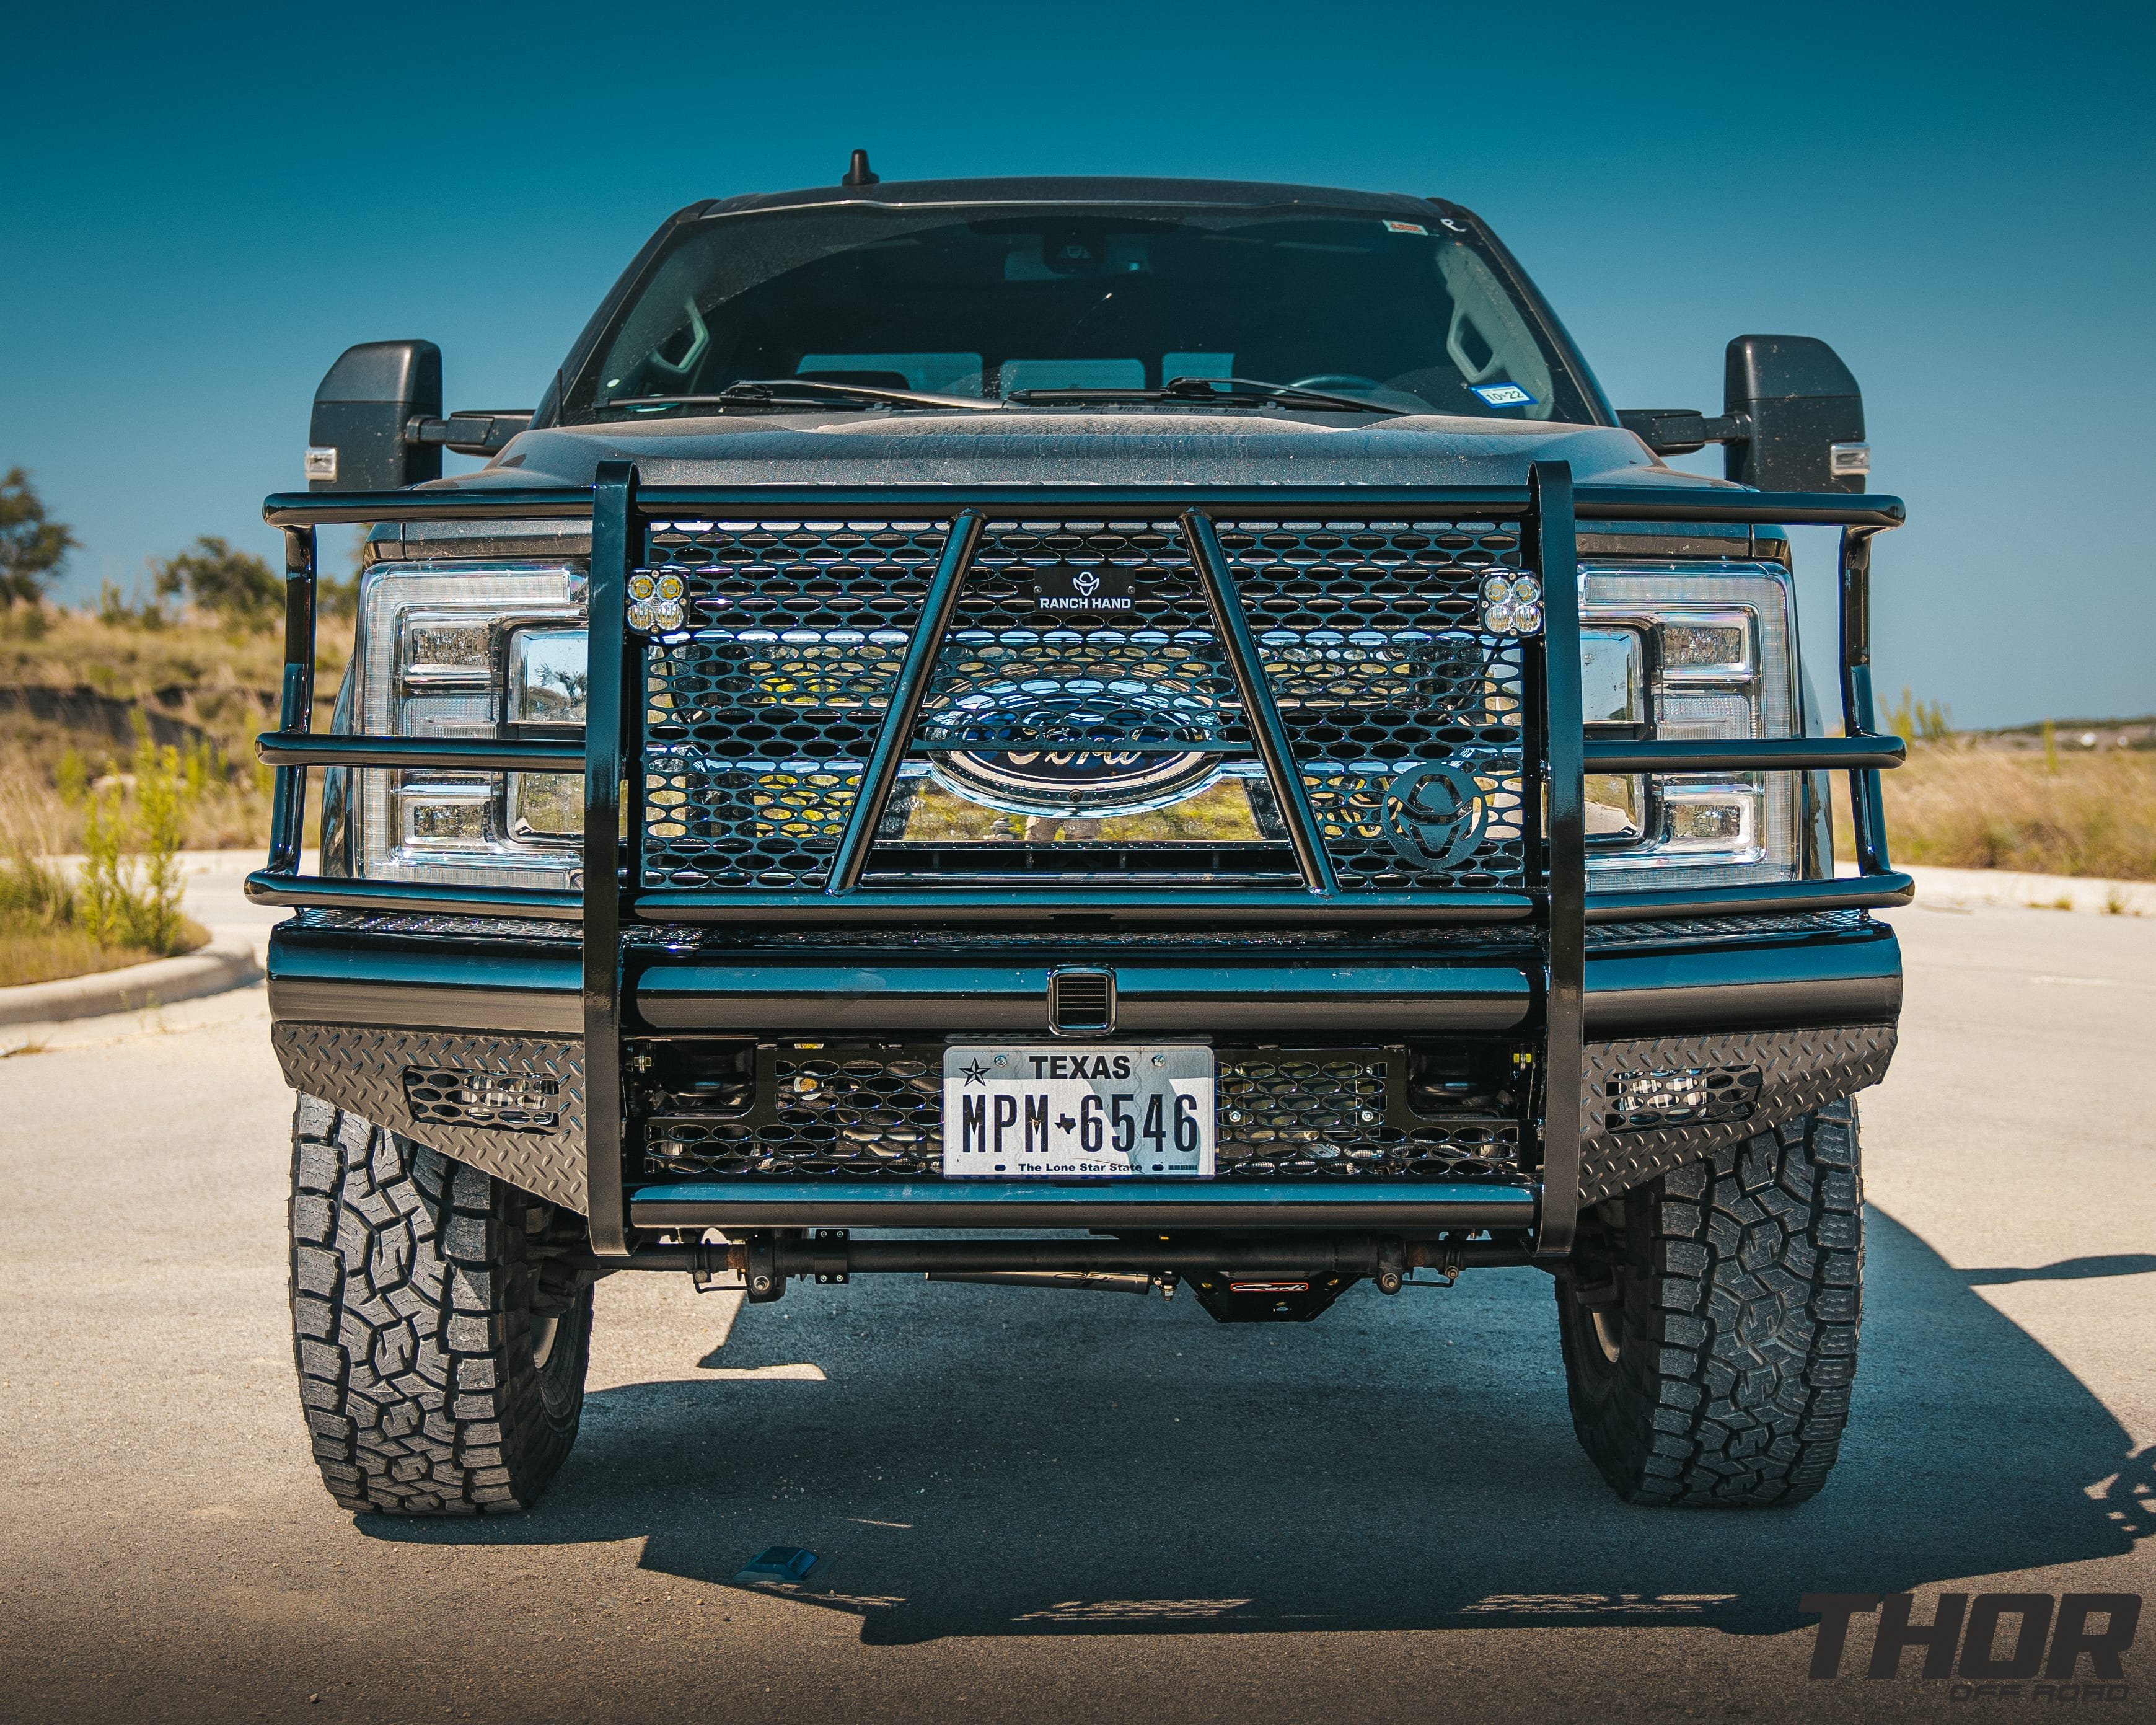 2019 Ford F-250 Super Duty Lariat in Grey with Carli 3.5" Suspension Kit, Carli Low Mount Steering Stabilizer, Carli High Mount Steering Stabilizer, Carli Add-A-Pack Spring Replacement, Carli Torsion Sway Bar, Method 315 18x9" Machine Finished Wheels, Toyo ATIII 37x12.50R18 Tires, Ranch Hand Legend Front and Rear Bumpers, Baja Design Squadron Lighting